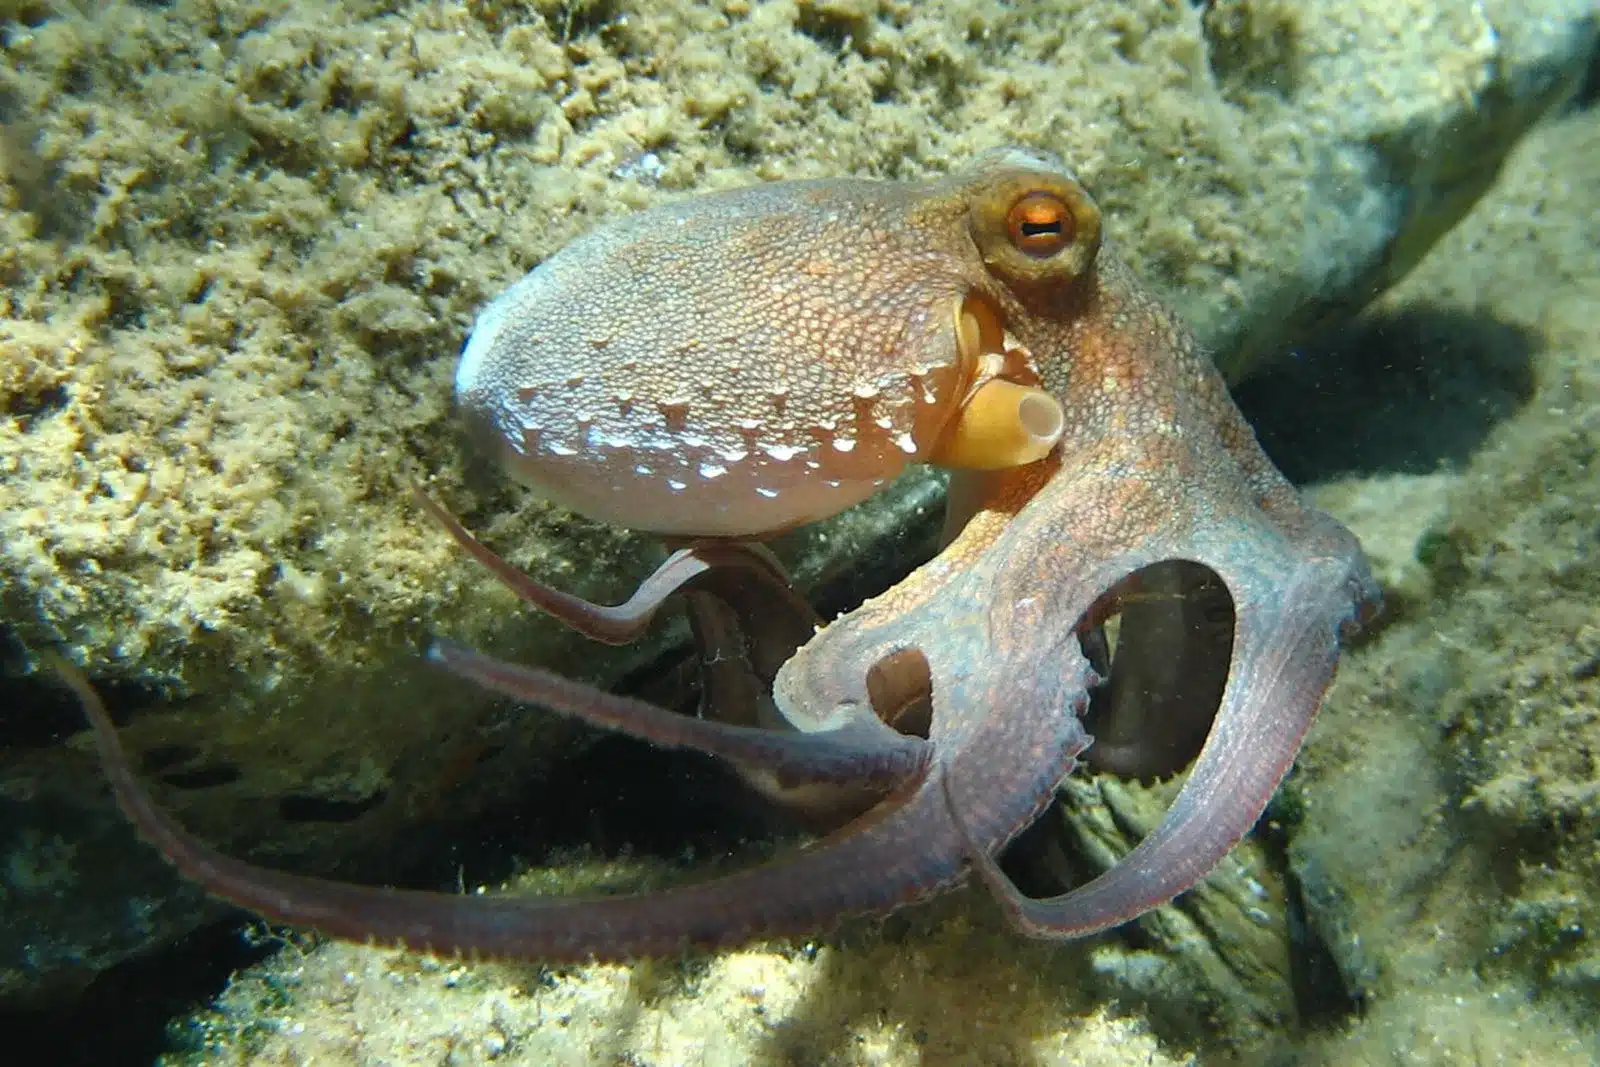  How Fast Can An Octopus Swim